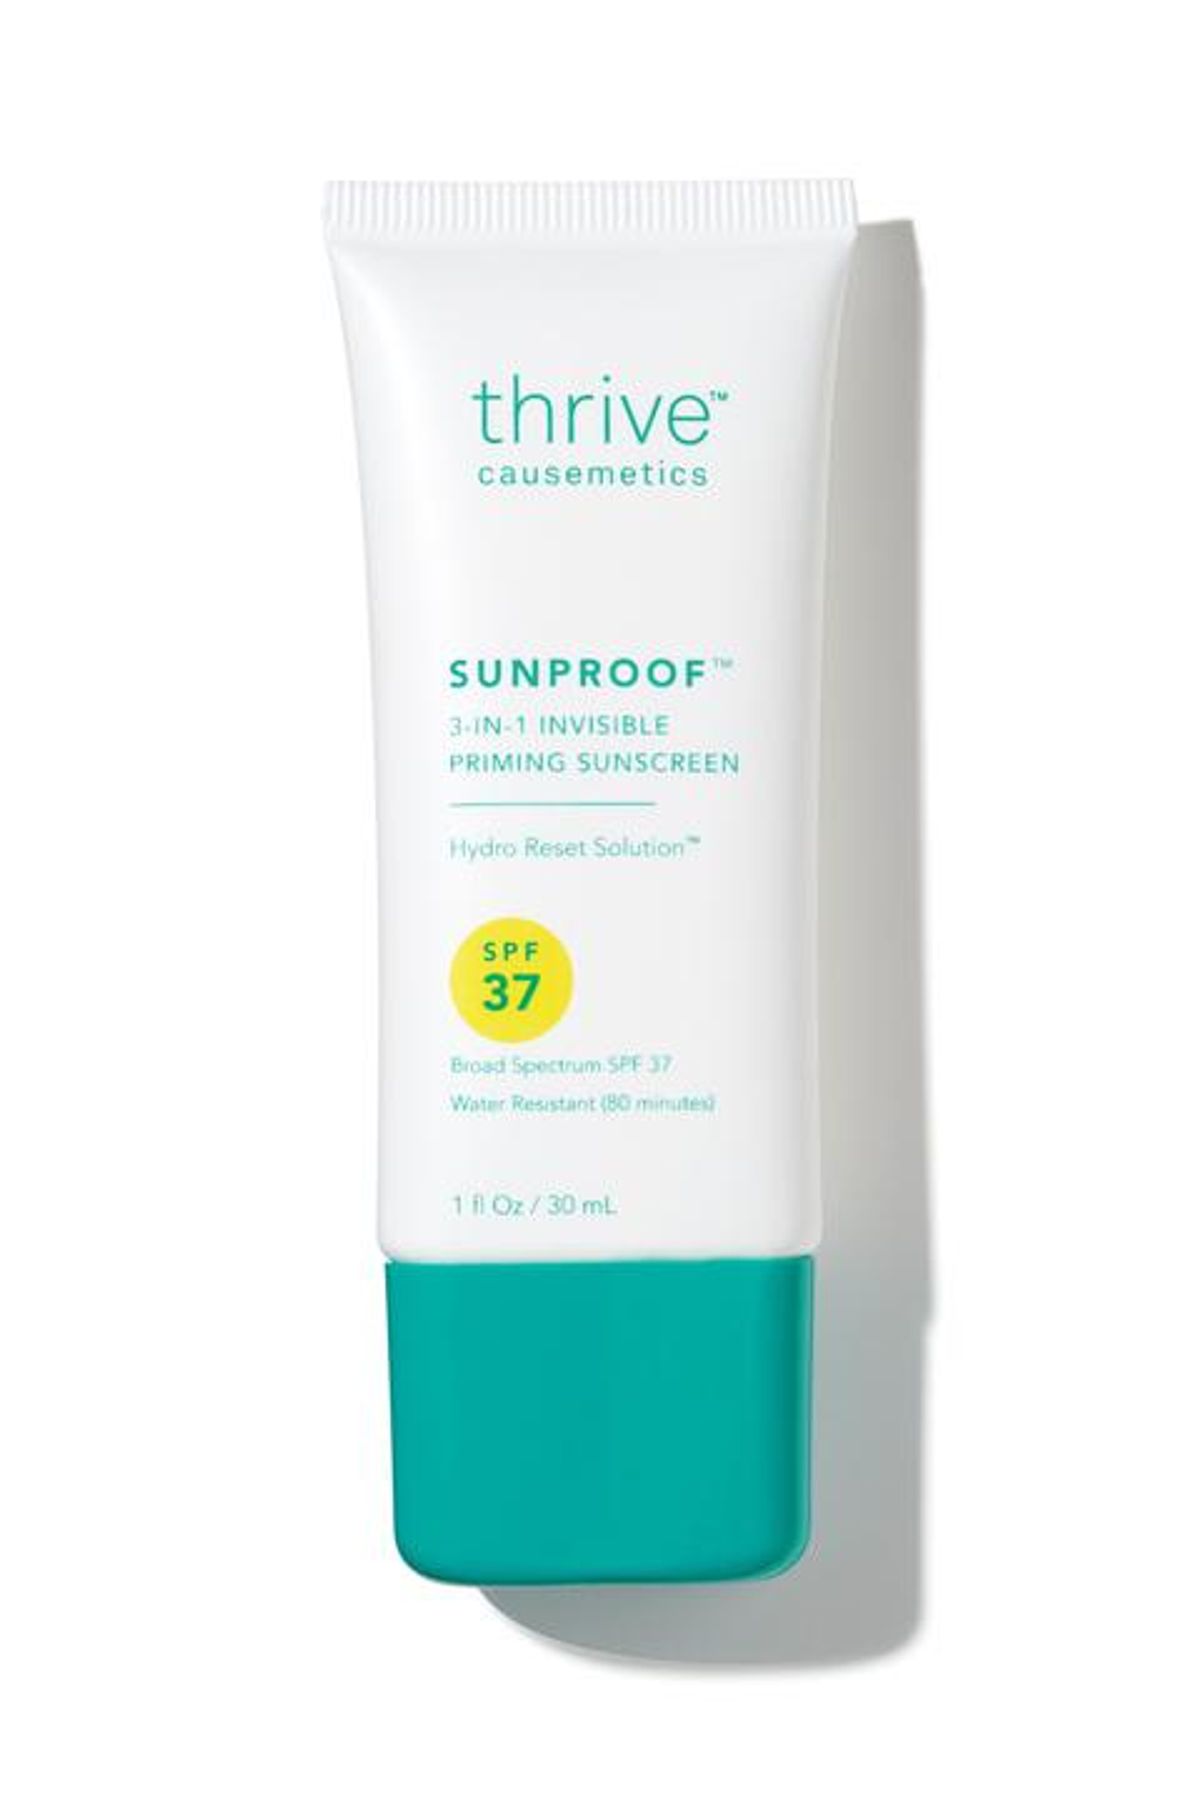 Sunproof 3-in-1 Invisible Priming Sunscreen SPF 37